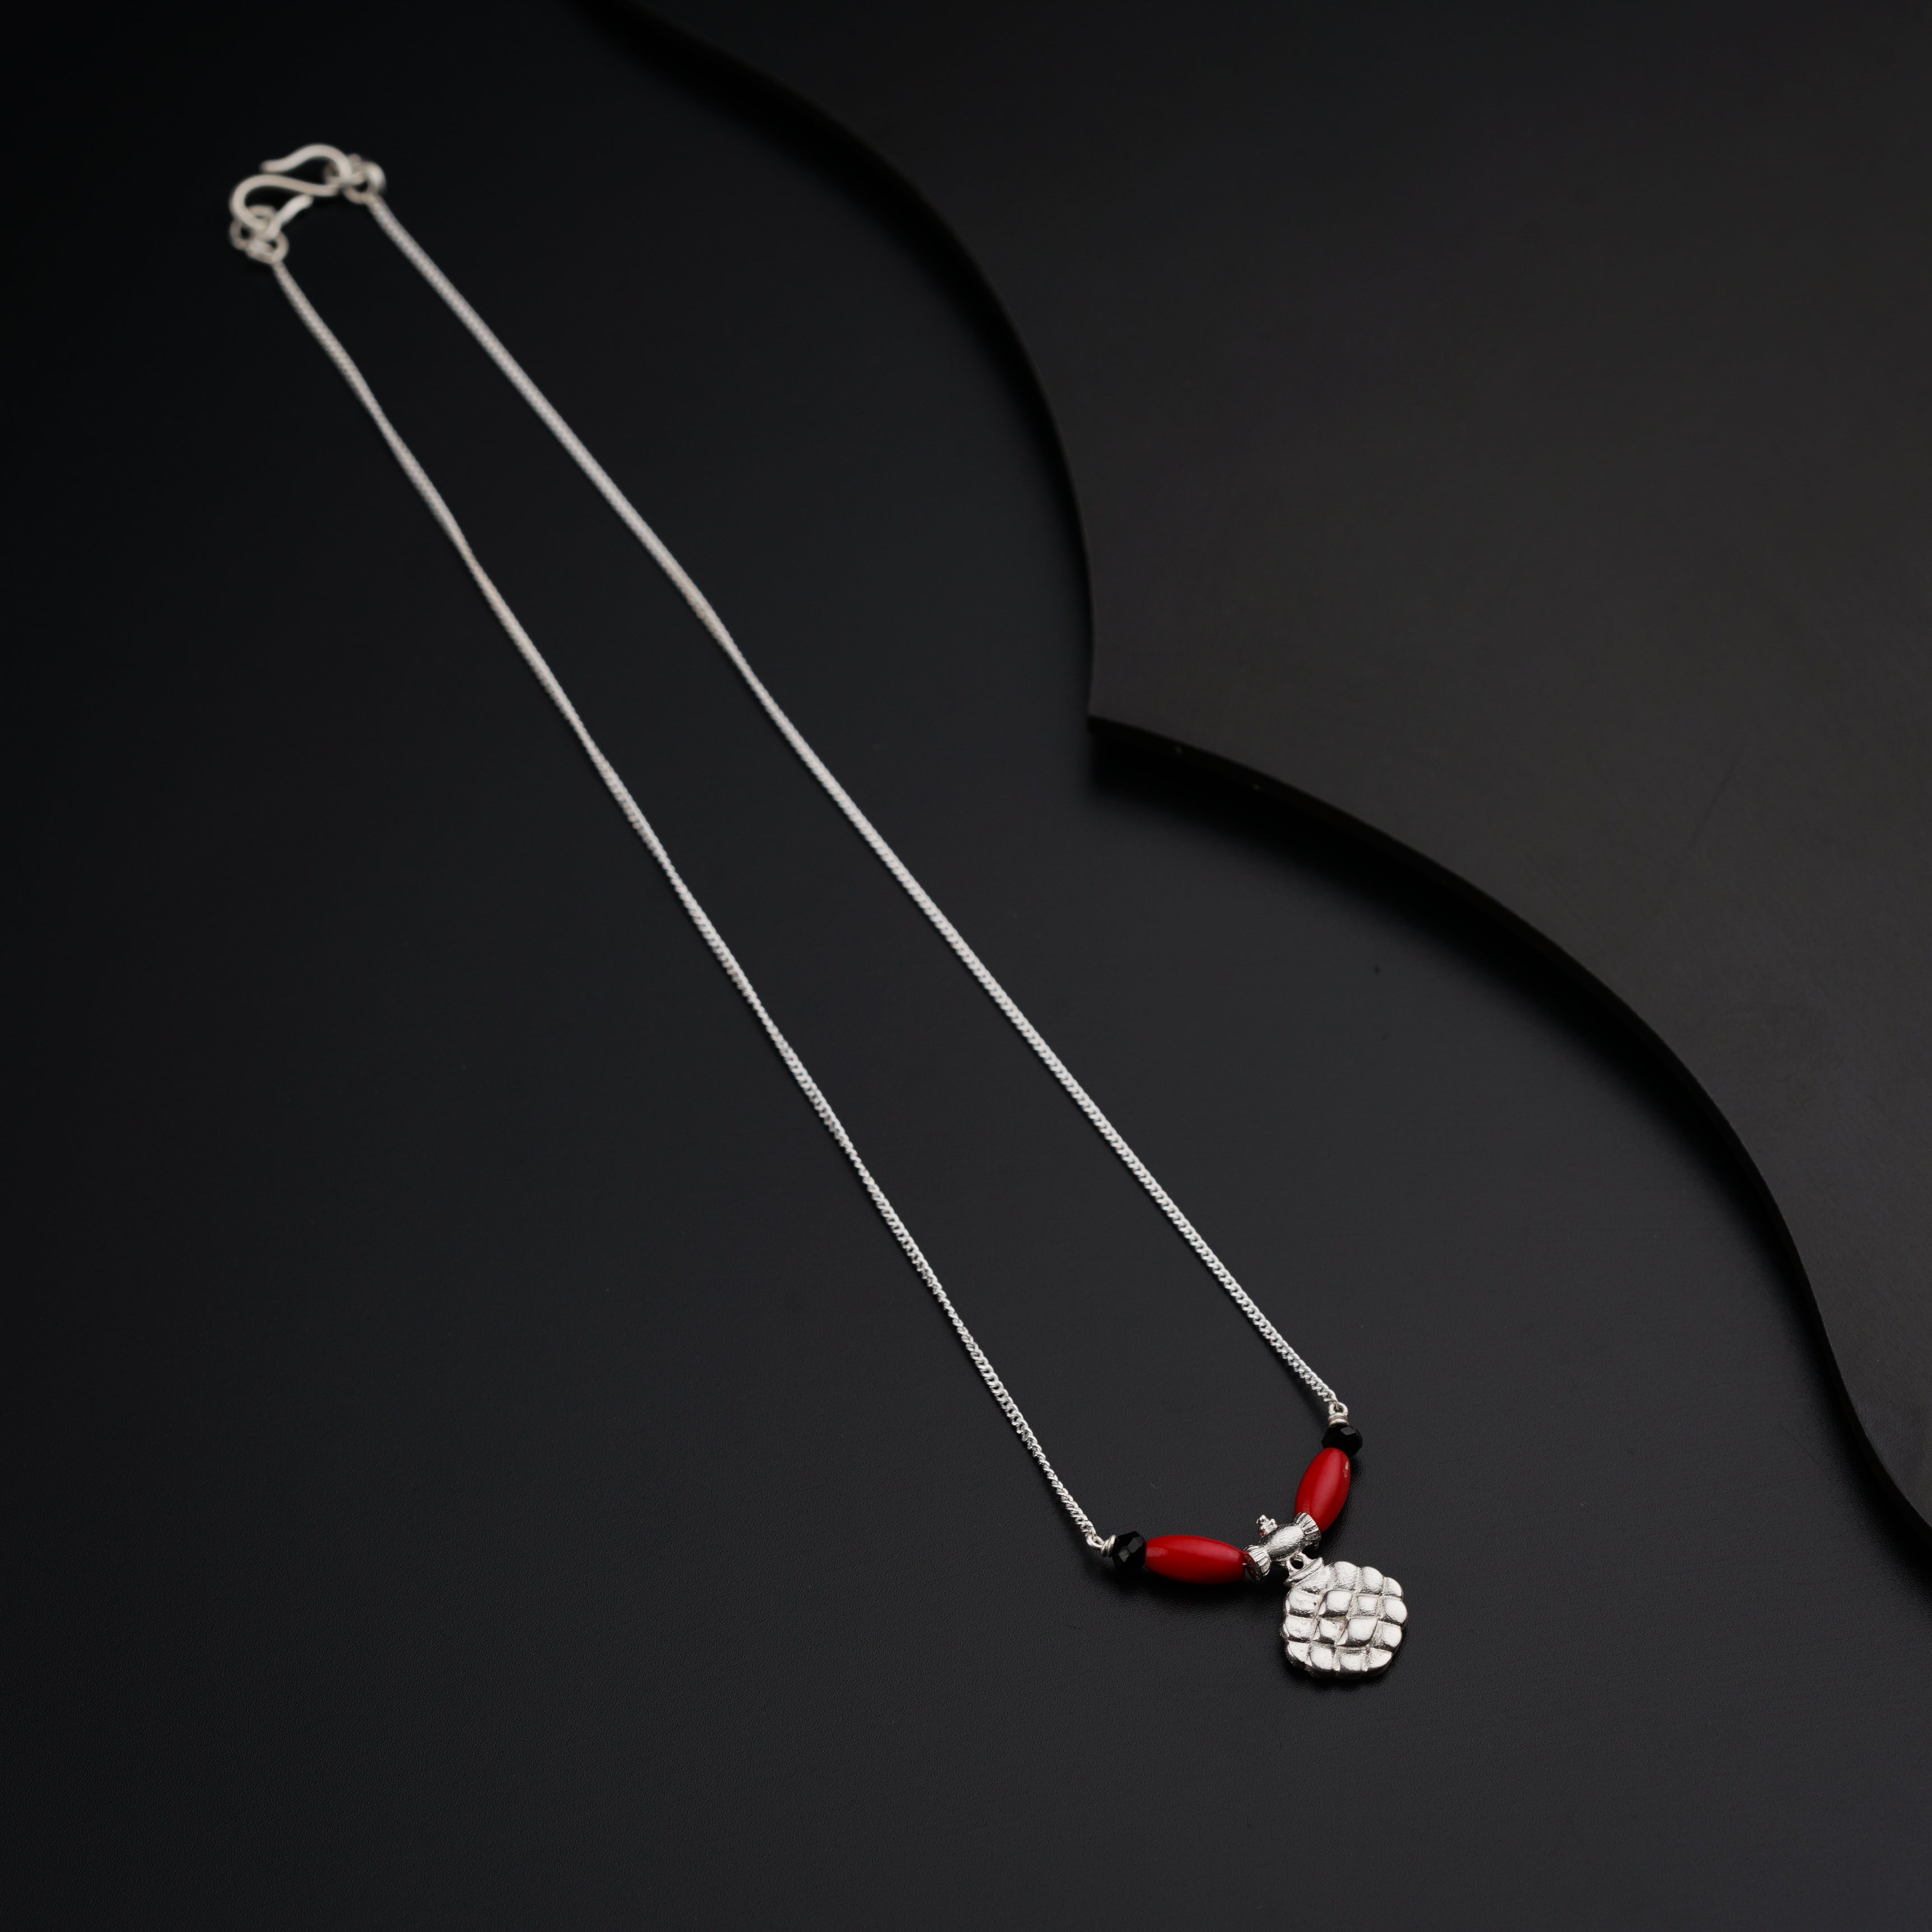 a necklace with a red bead hanging from it